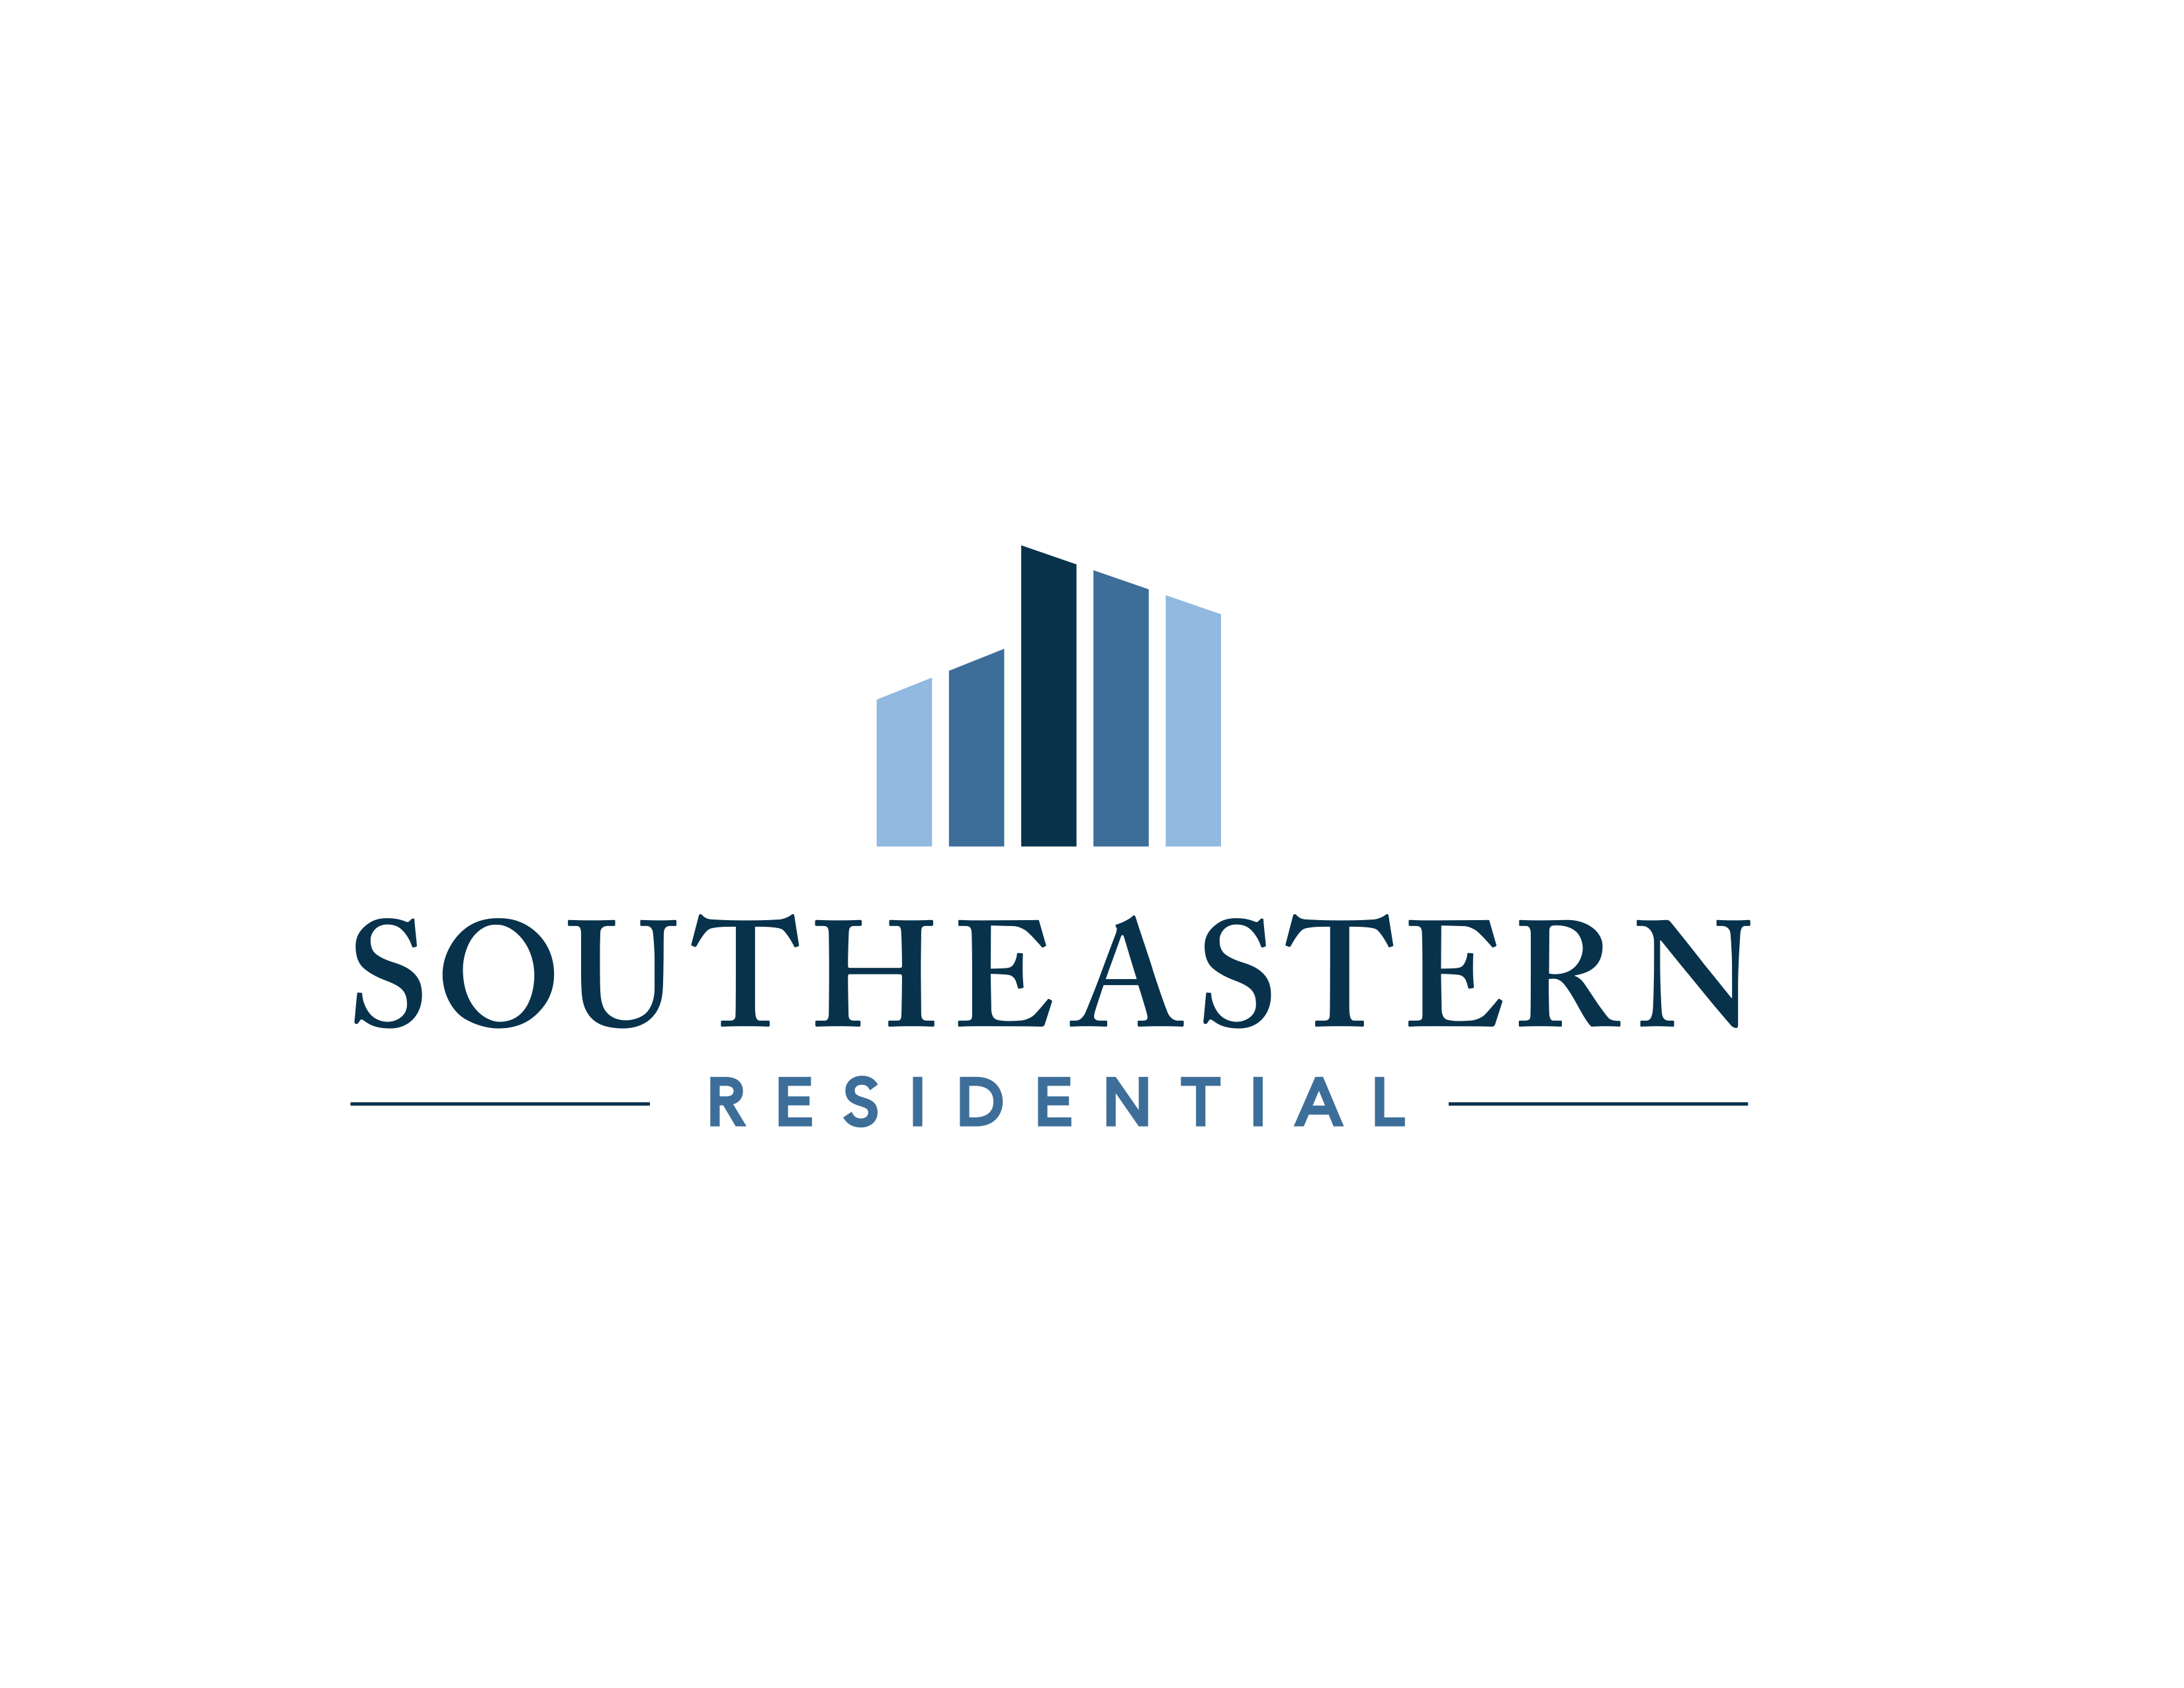 Southeastern Residential